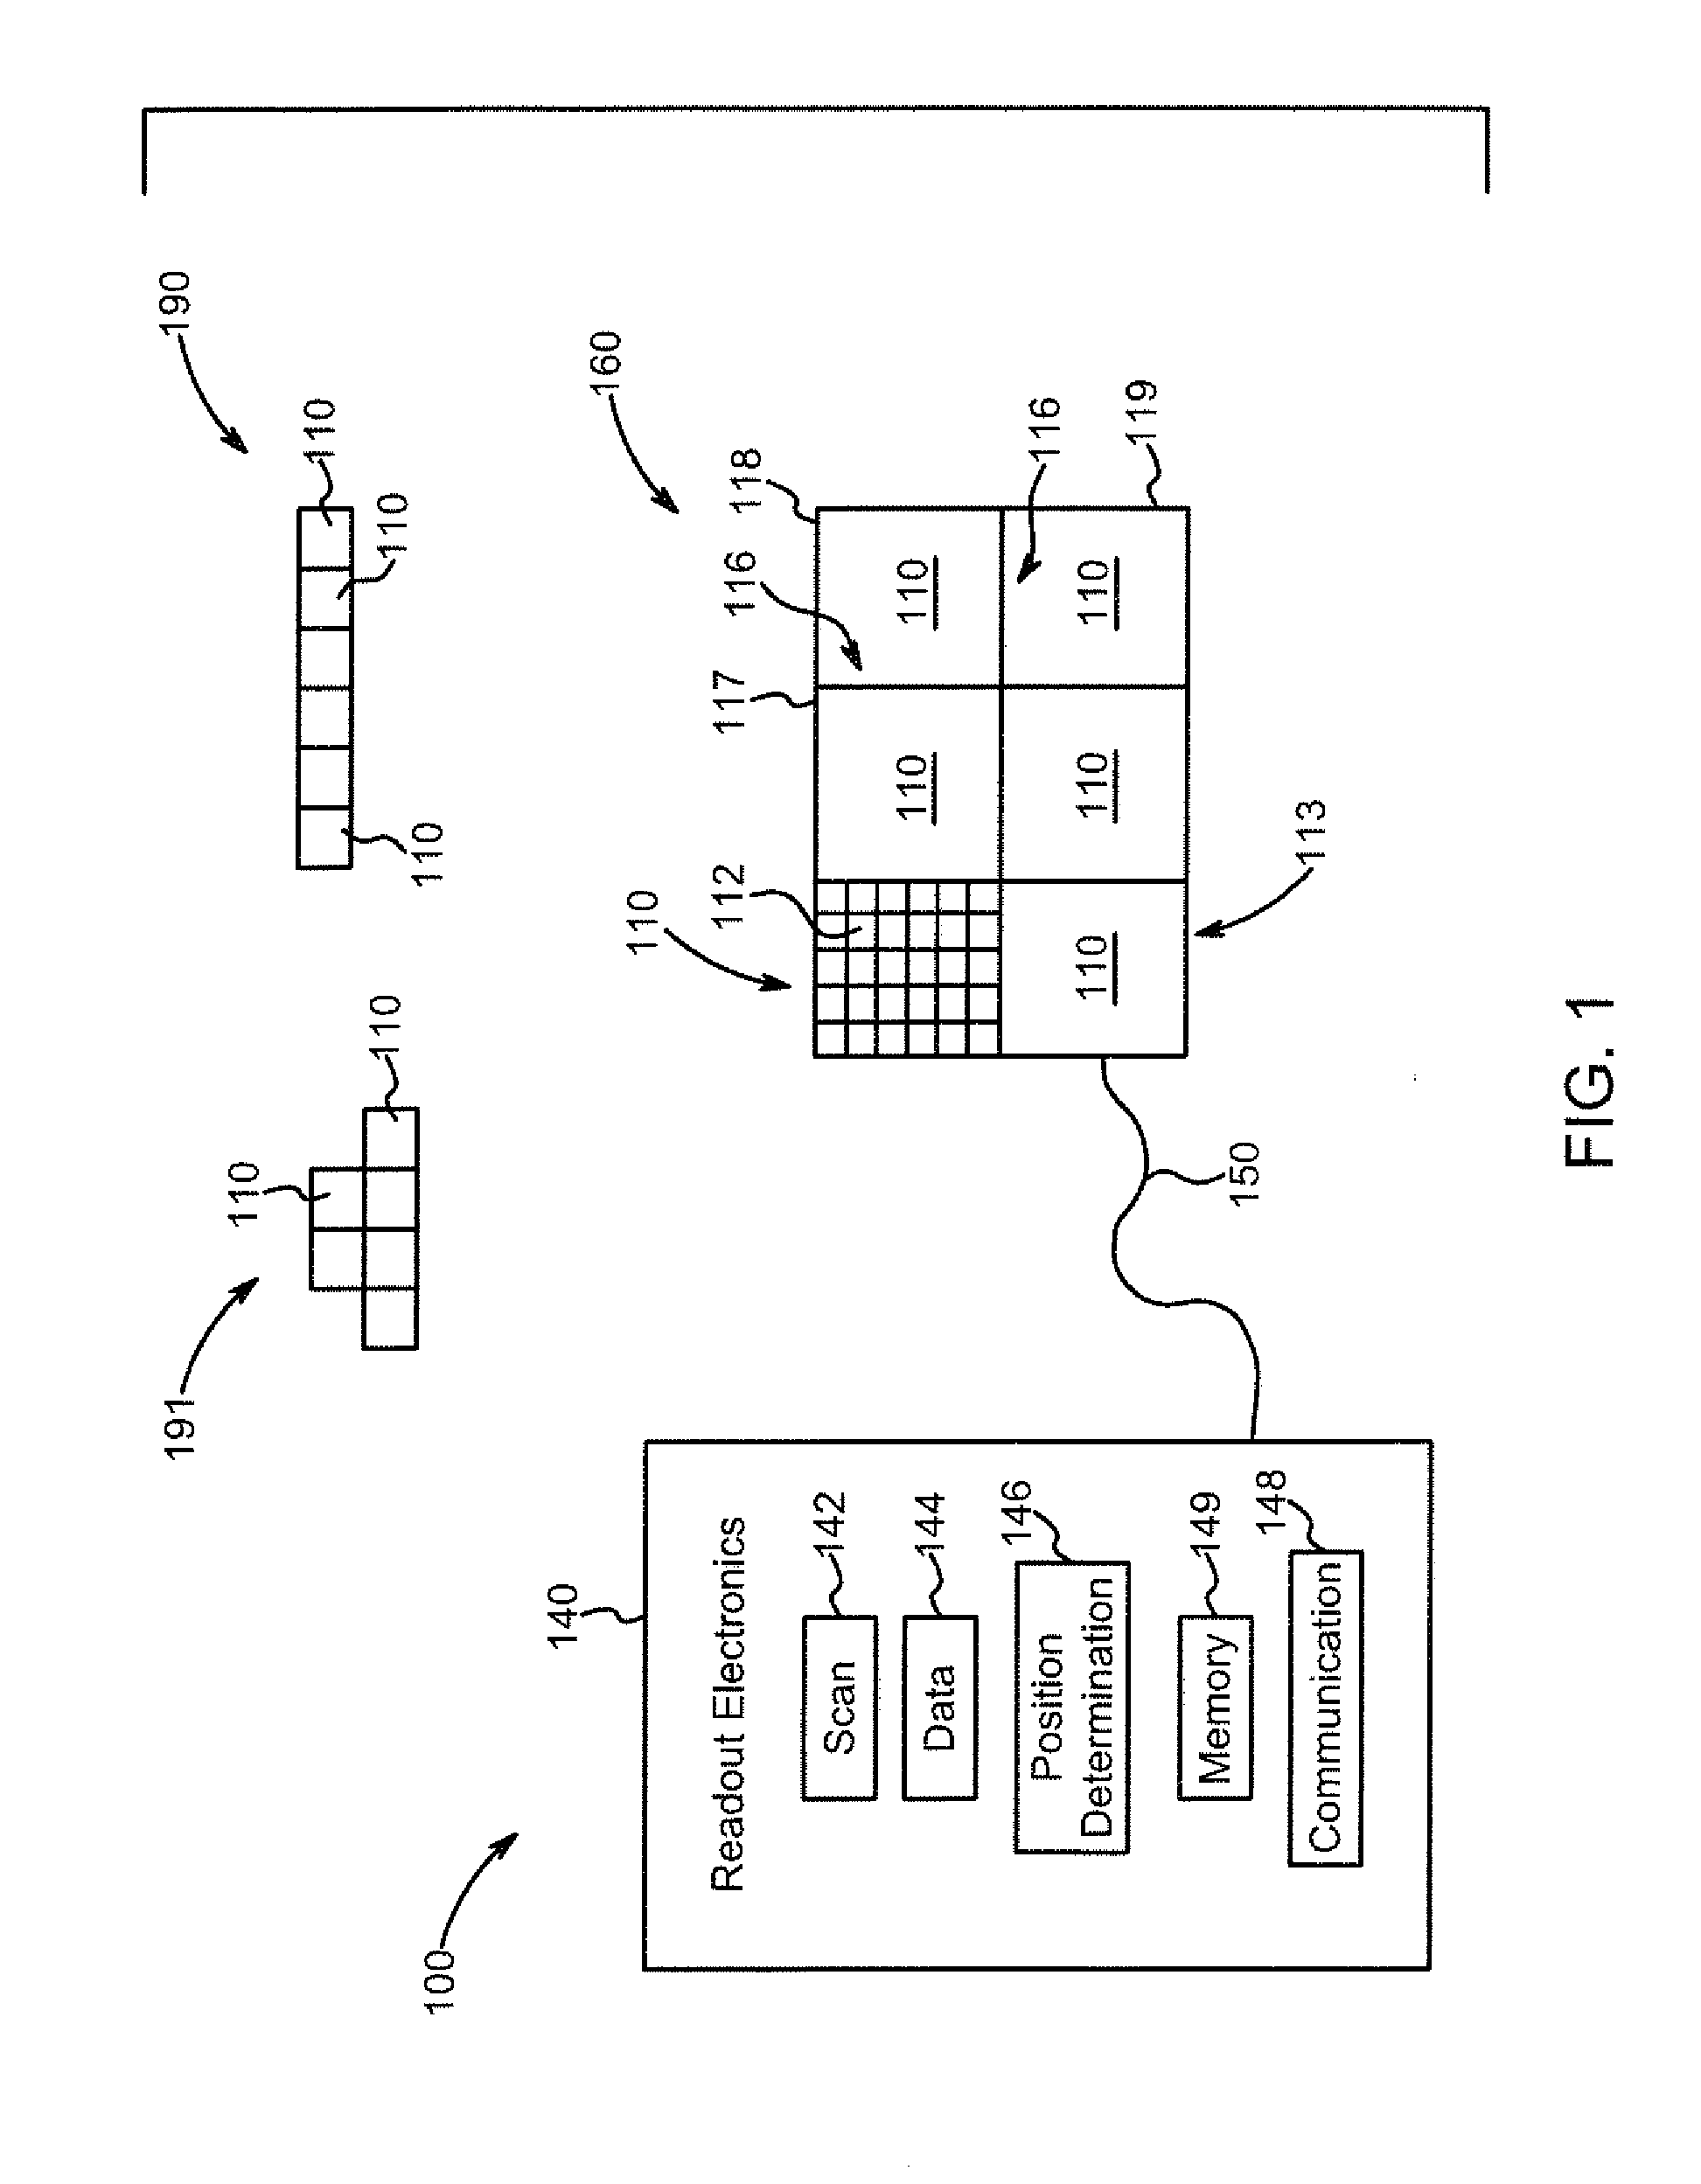 Systems and methods for modular imaging detectors